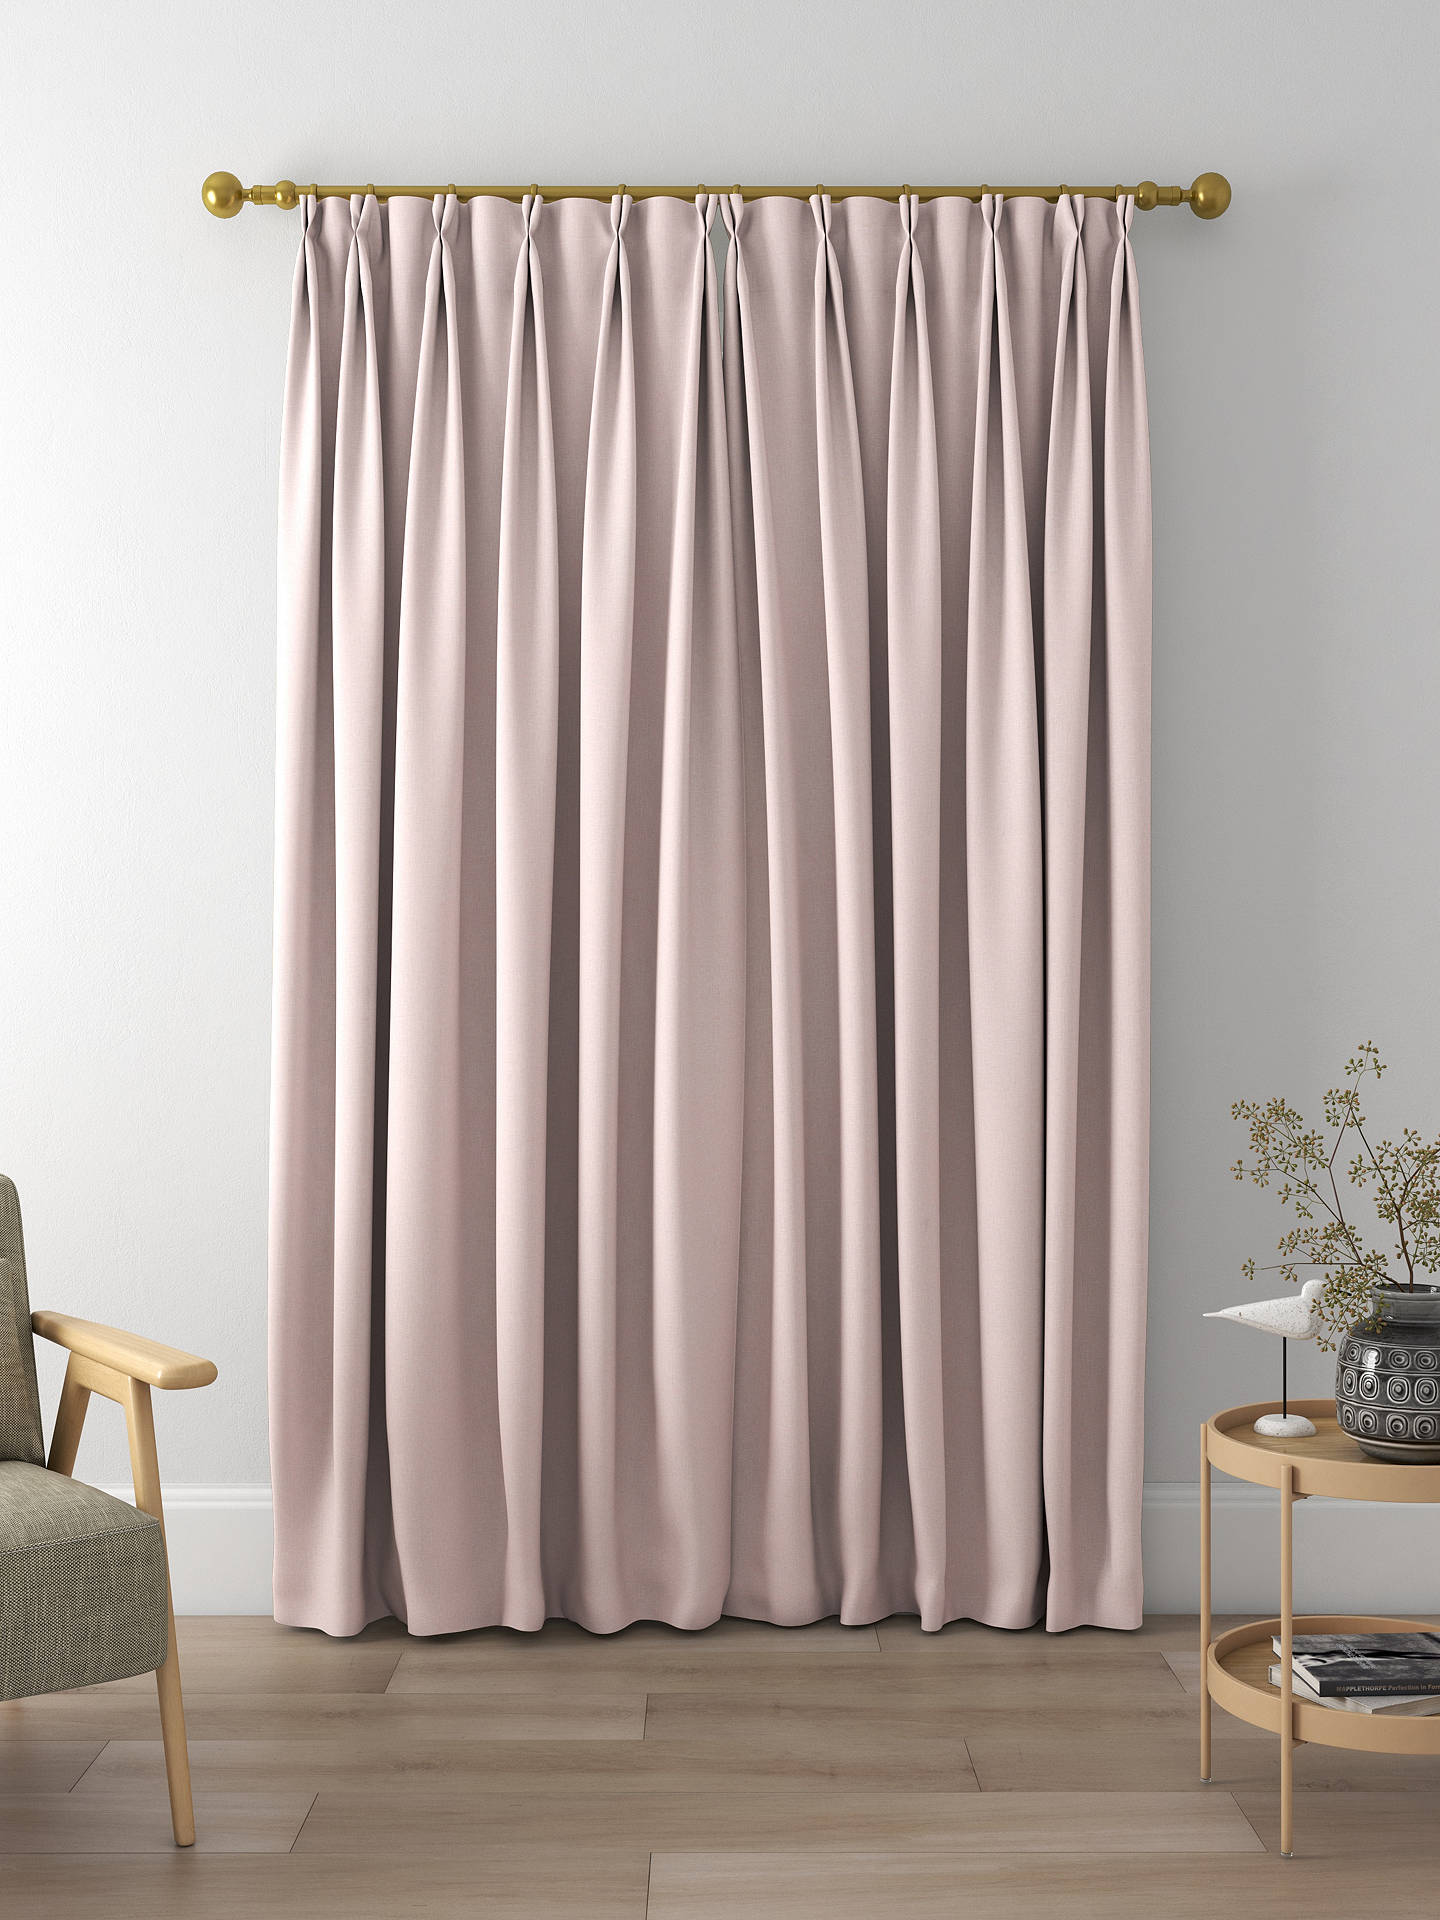 Laura Ashley Easton Made to Measure Curtains, Blush